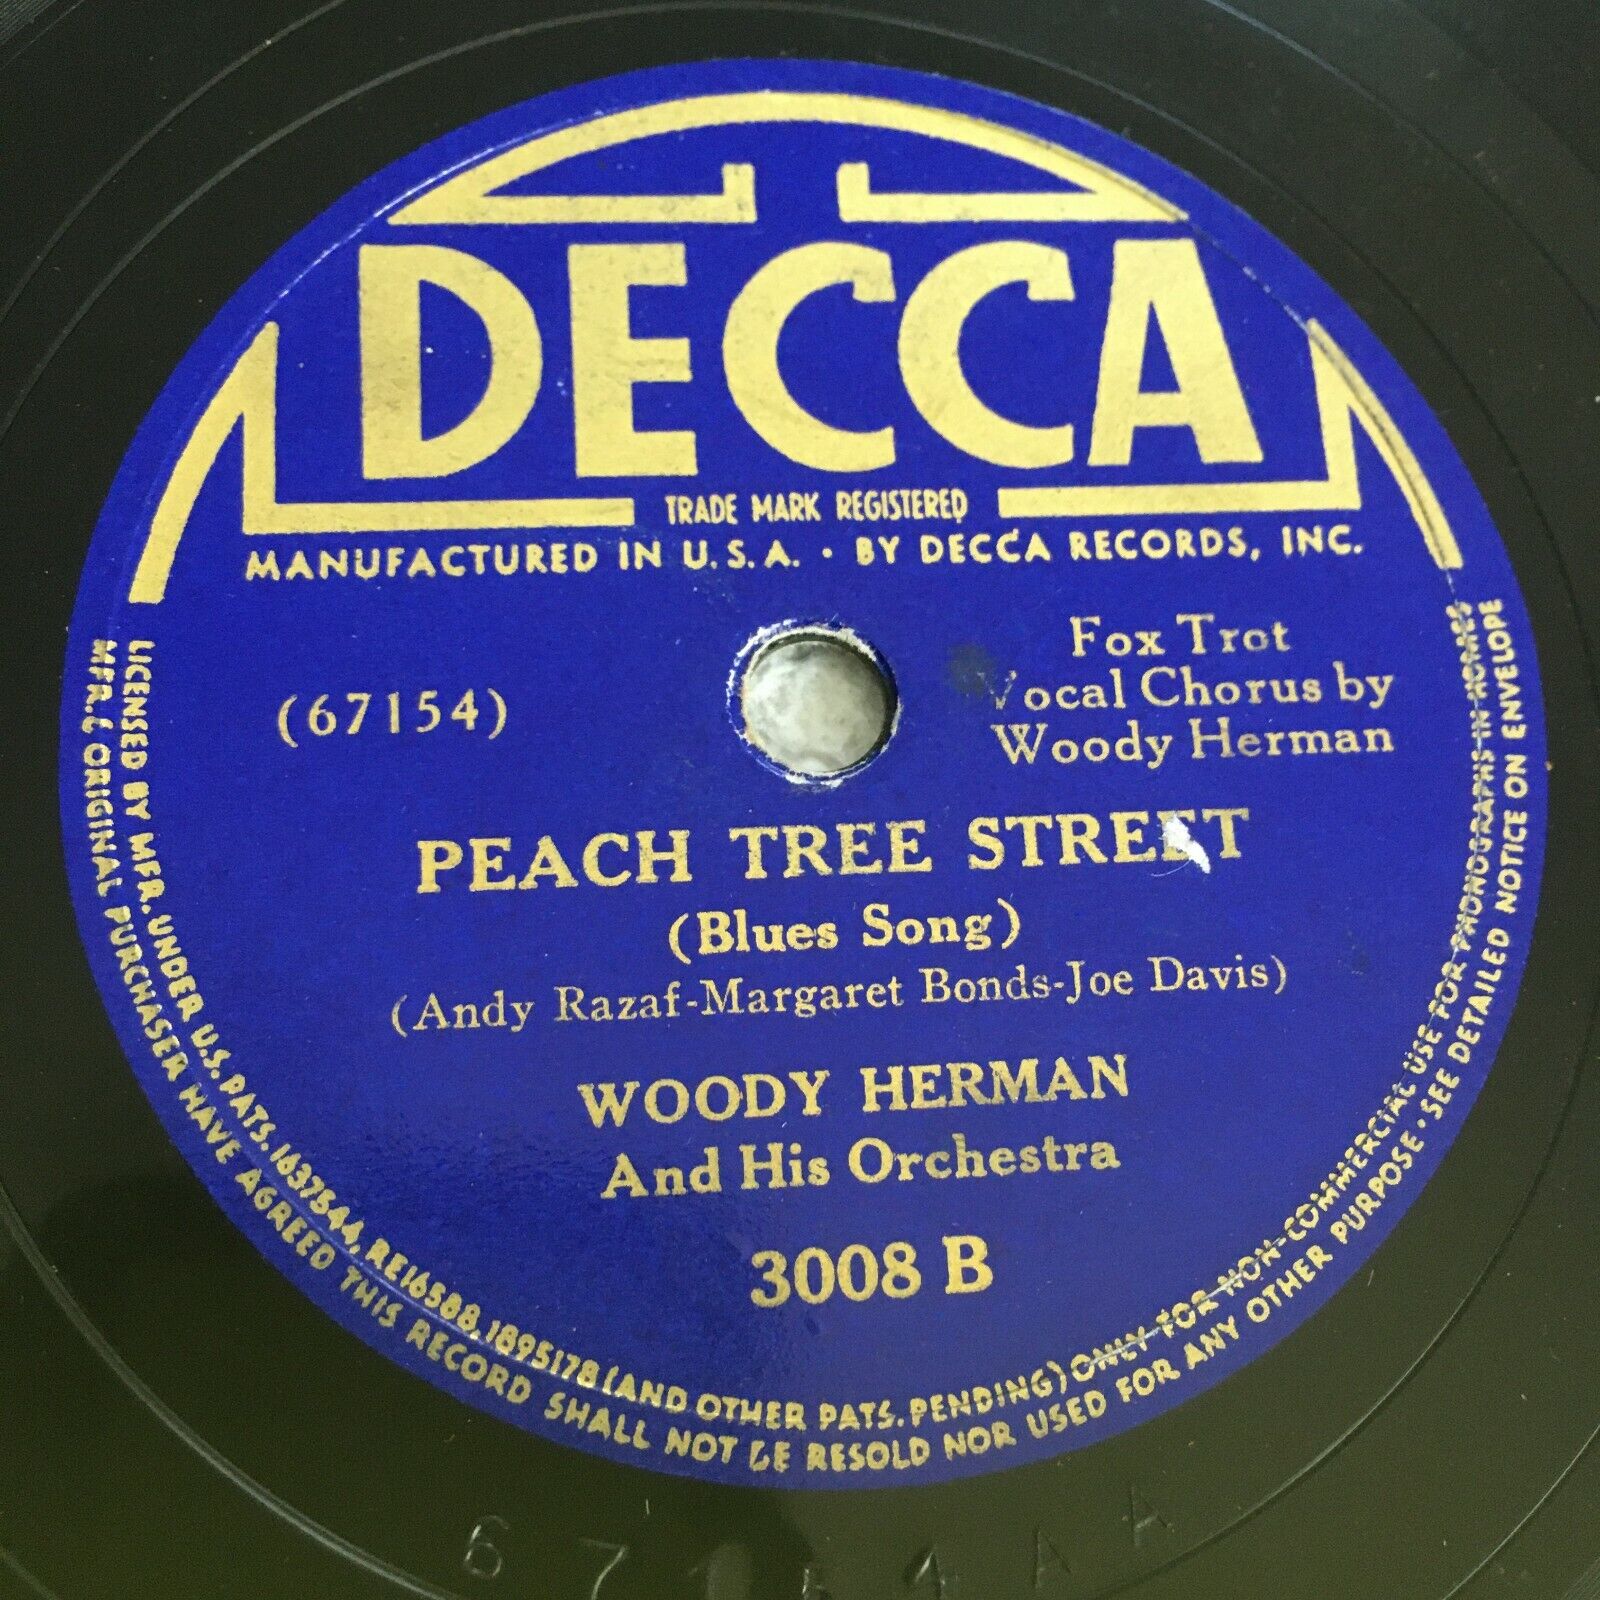 WOODY HERMAN Give A Little Whistle DISNEY Pinocco /Peach Tree DECCA 3008 78 RPM 